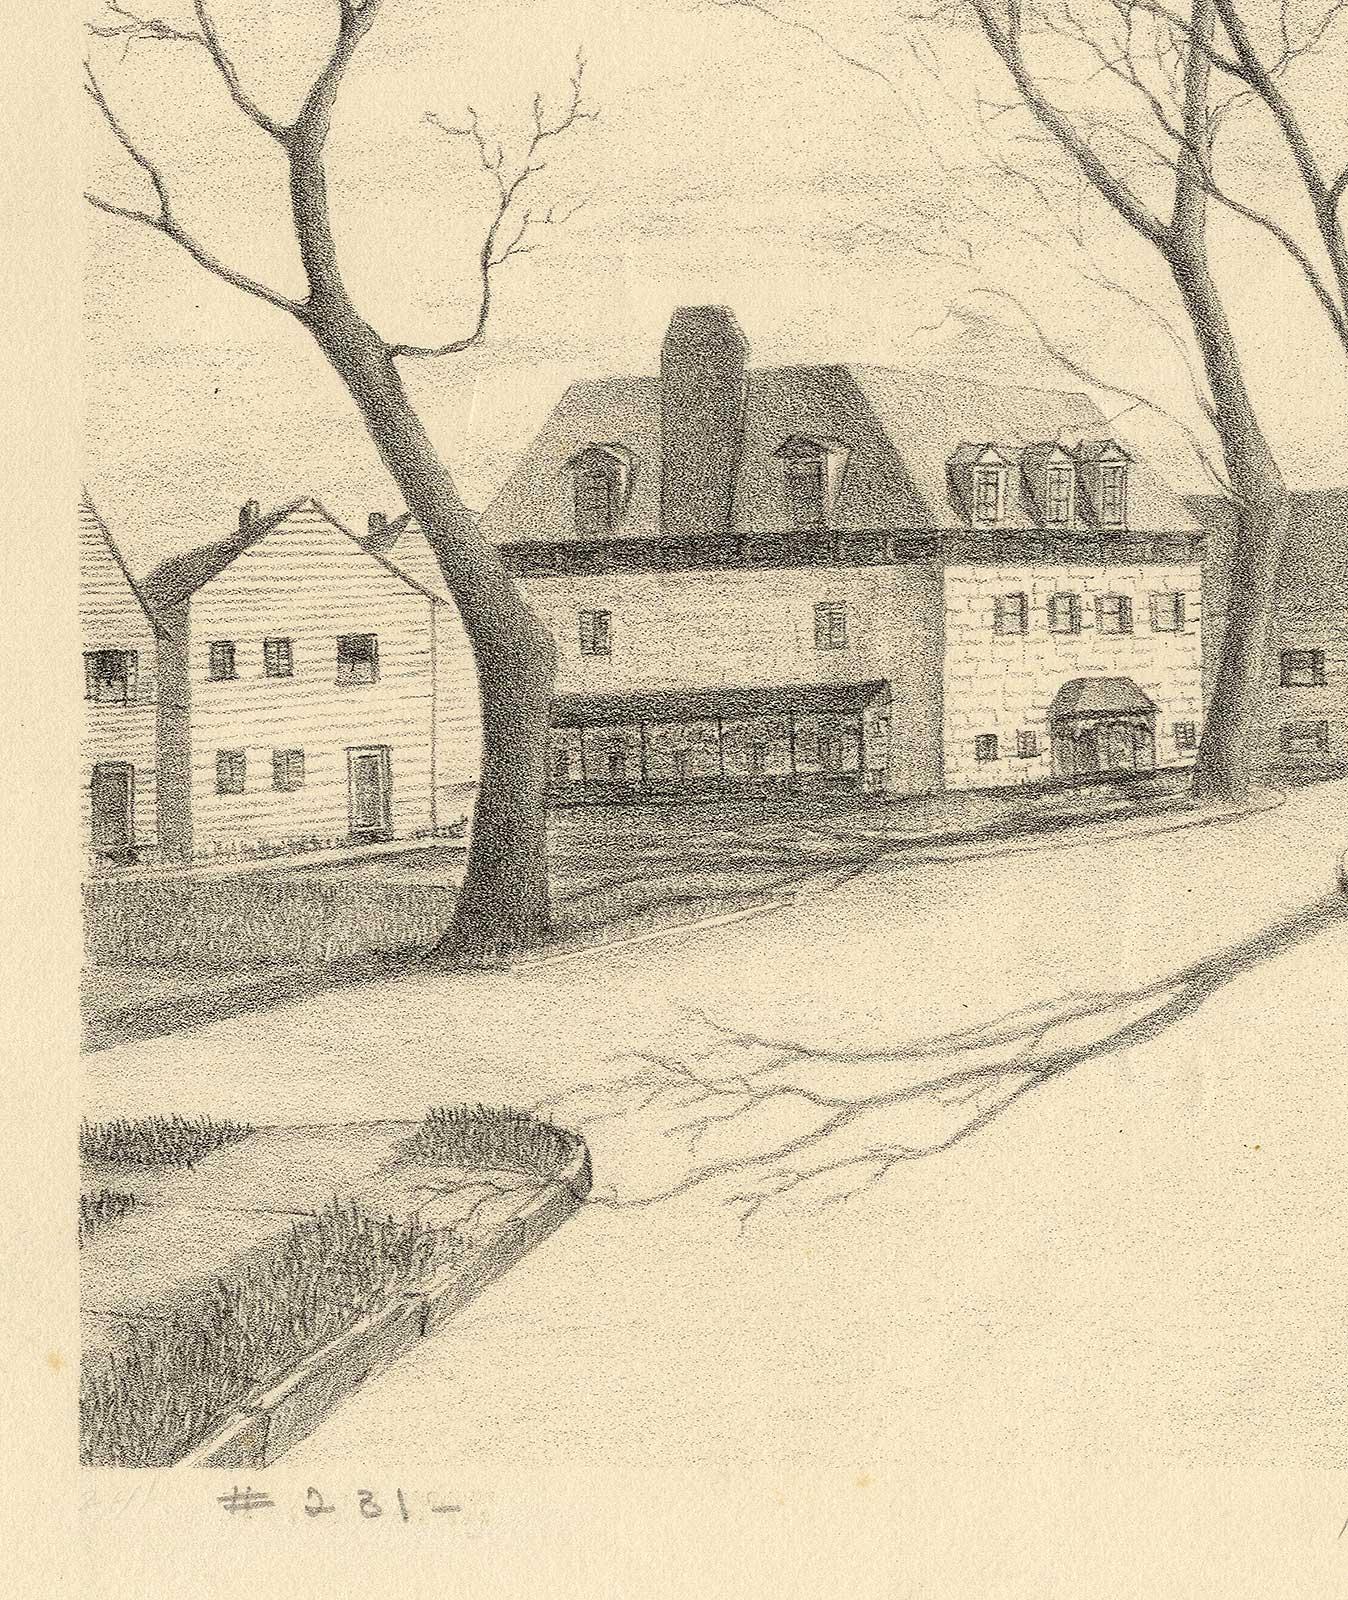 Hudson Valley Street (This impression was created as part of WPA Project) - Print by Grant Arnold